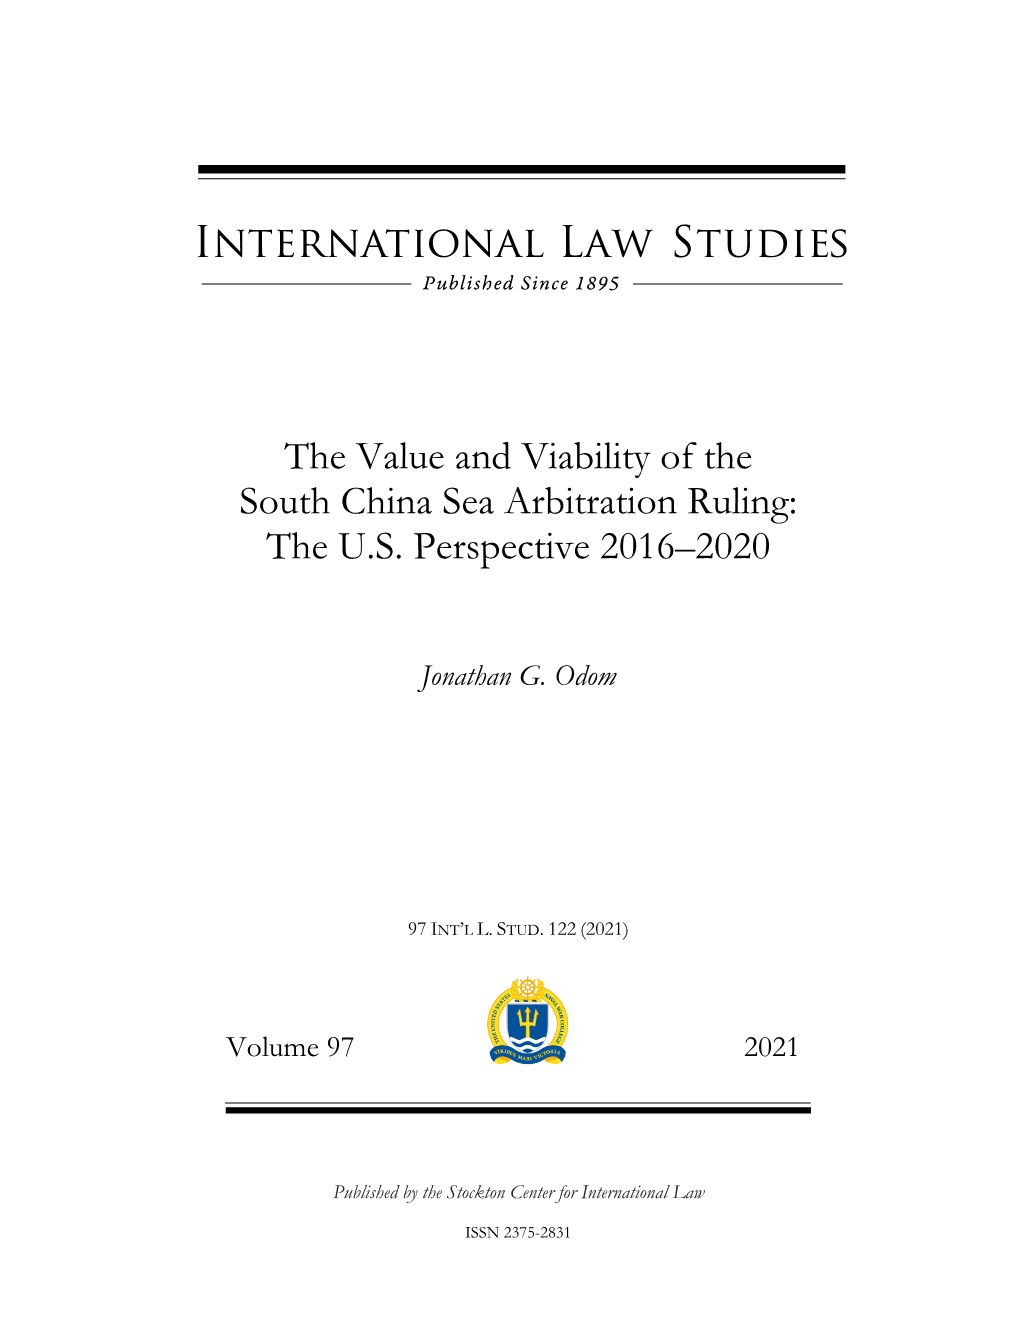 The Value and Viability of the South China Sea Arbitration Ruling: the U.S